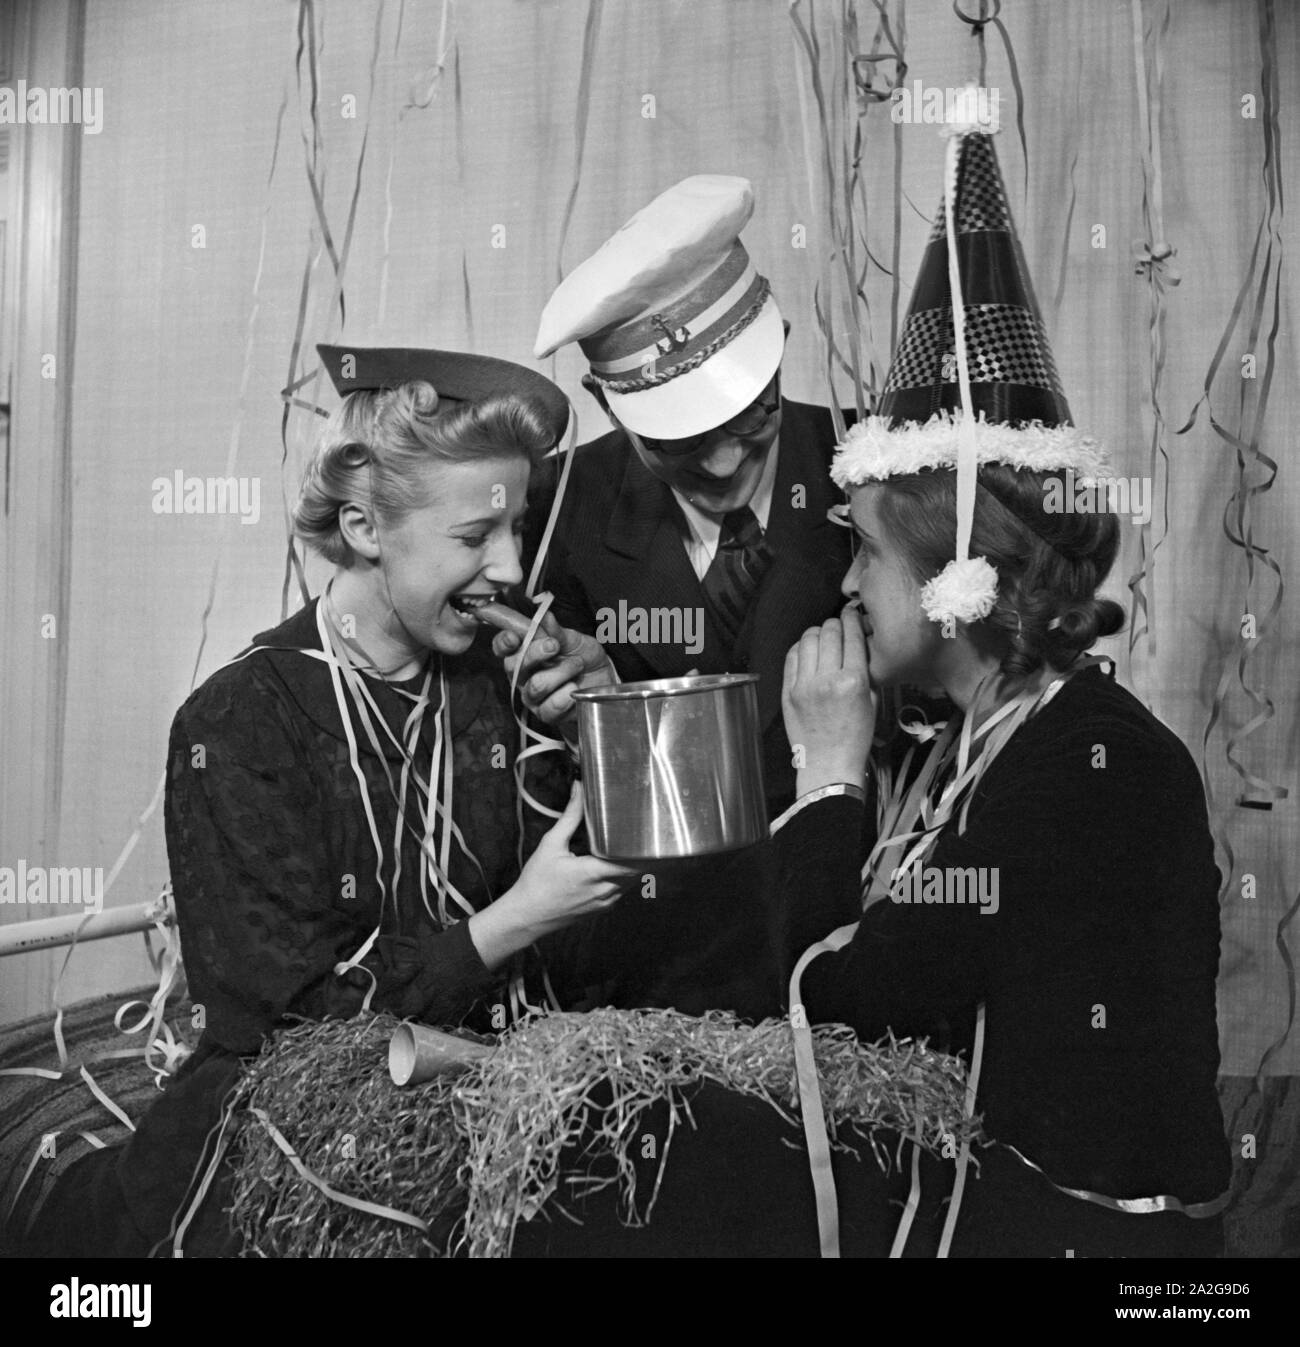 Gäste einer Silvesterparty, Deutsches Reich 1930er Jahre. Guests of a New Year's Eve party, Germany 1930s. Stock Photo